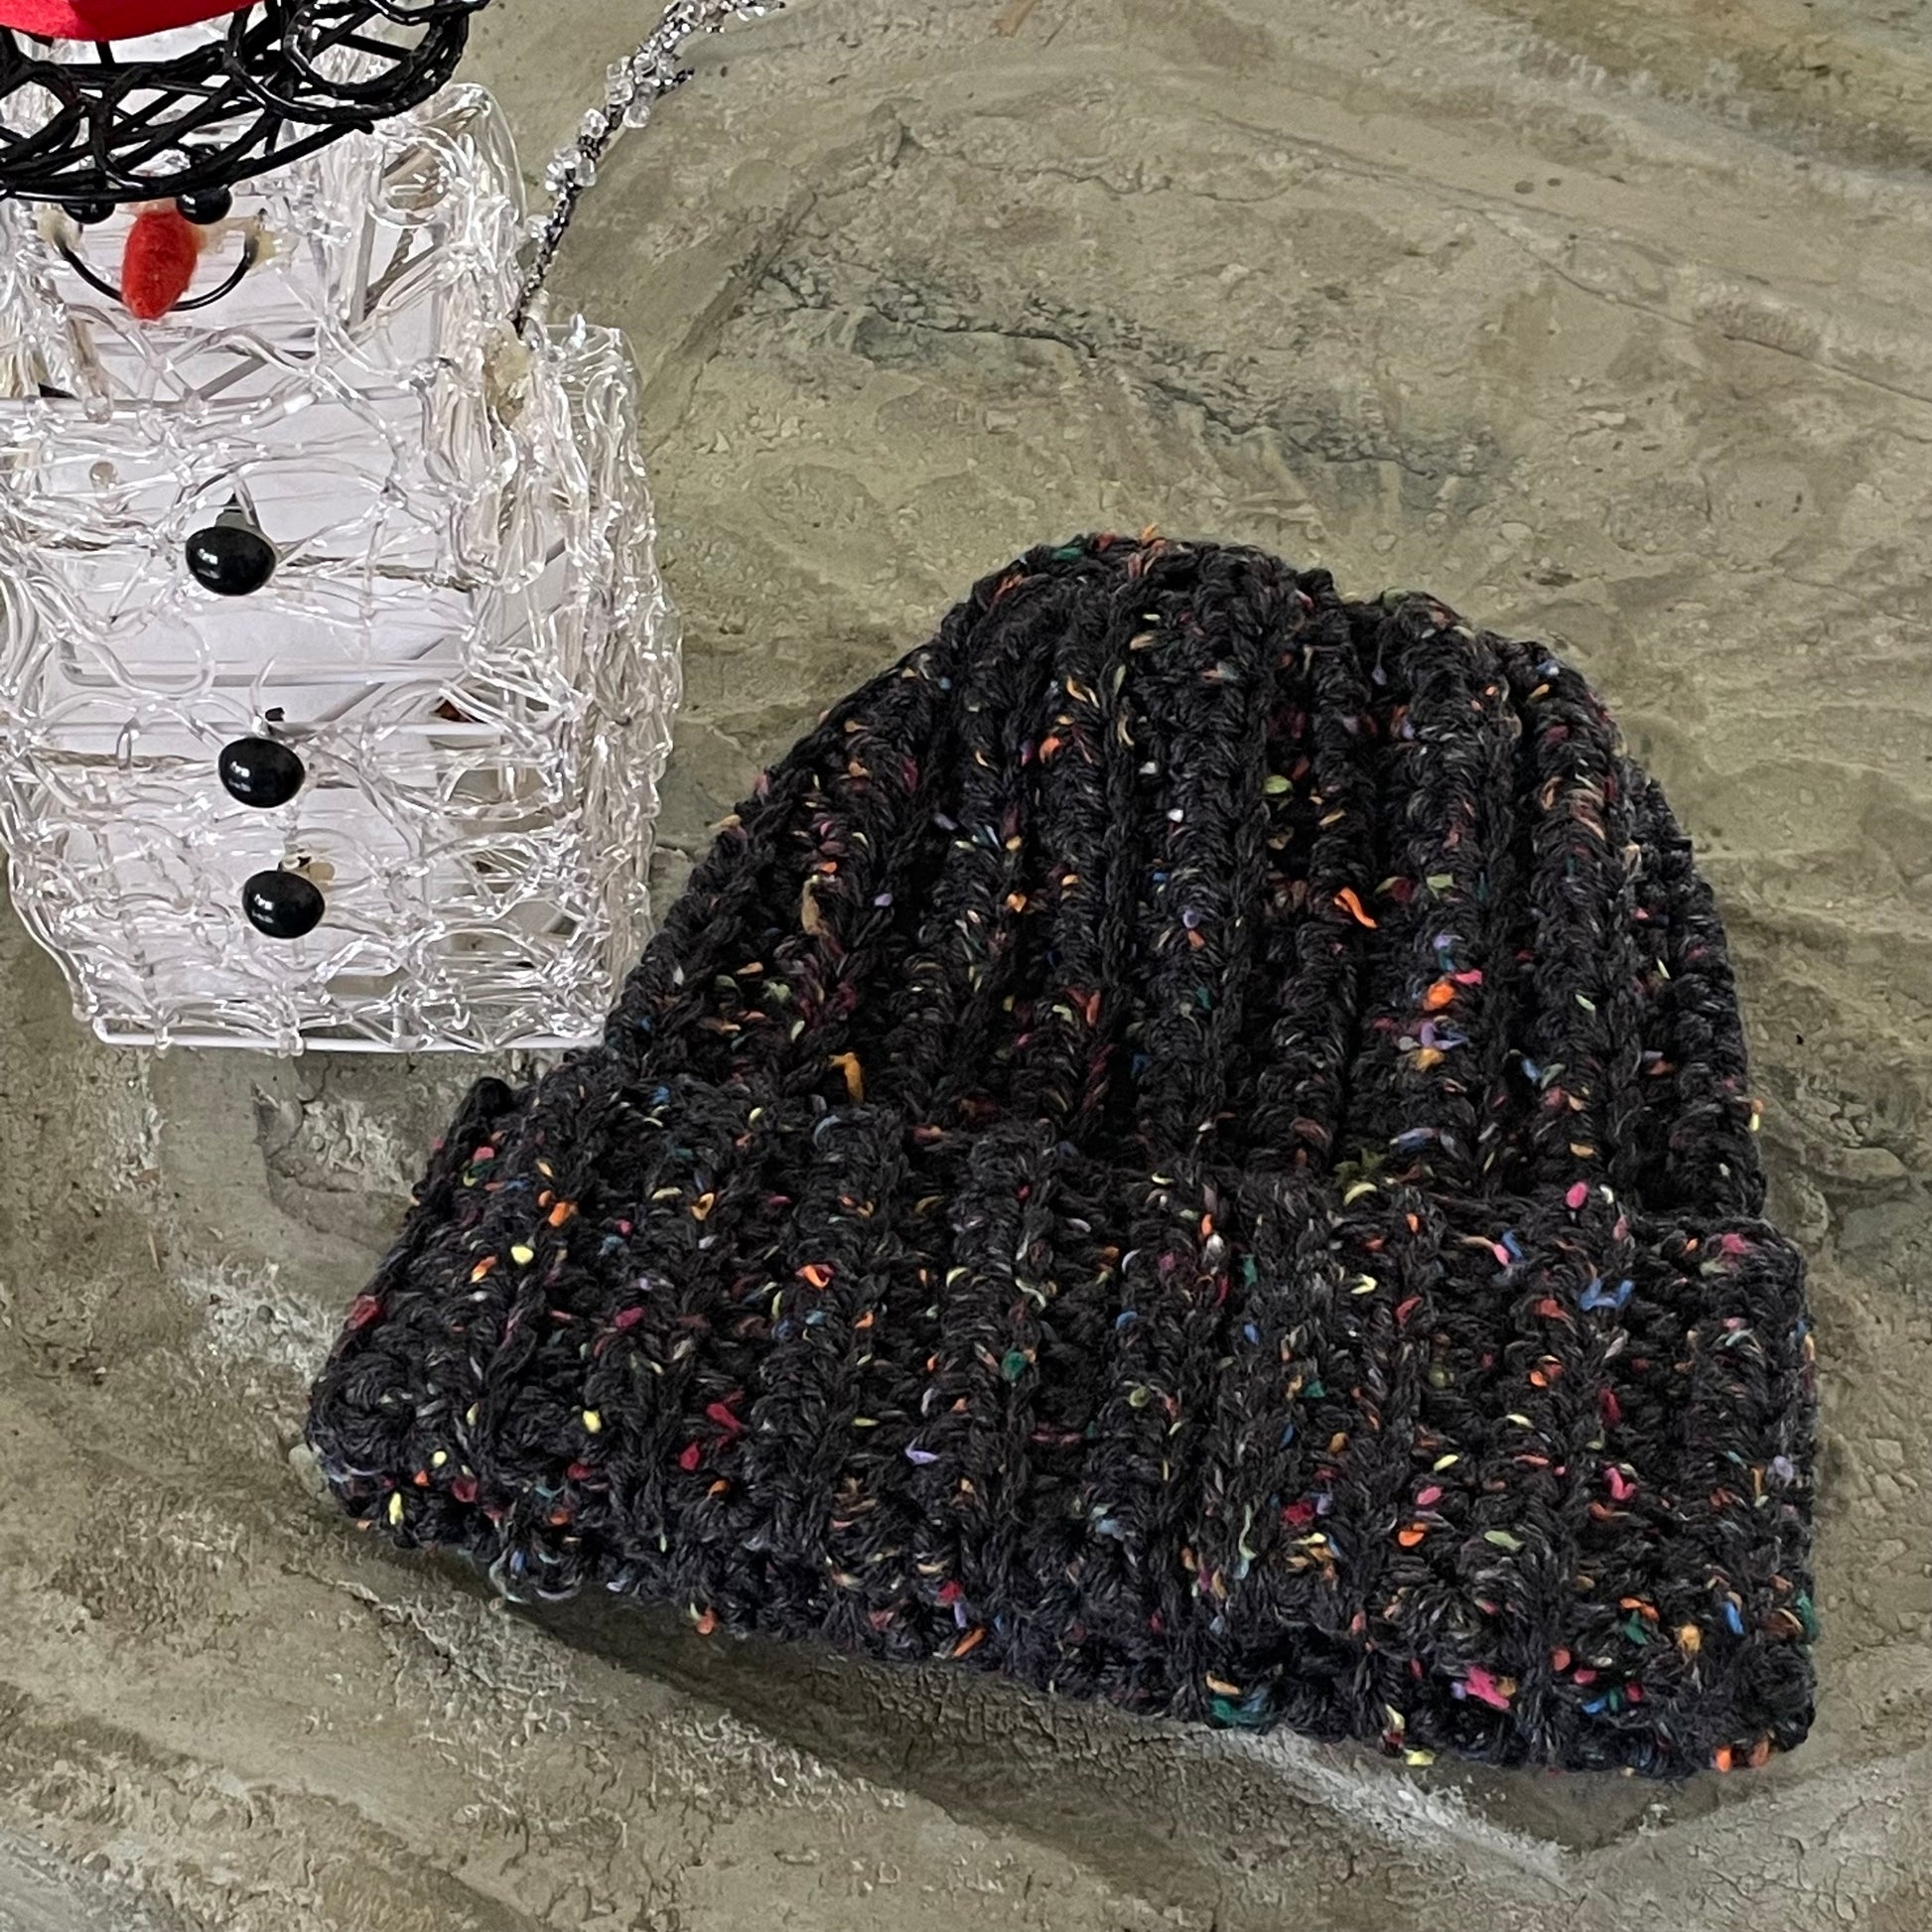 Extra Warm Ribbed Cable Knit Hat Charcoal Black & Speckled Rainbow Hand Crocheted Beanie Winter Unisex Outdoor Stretch Adjustable Cuff